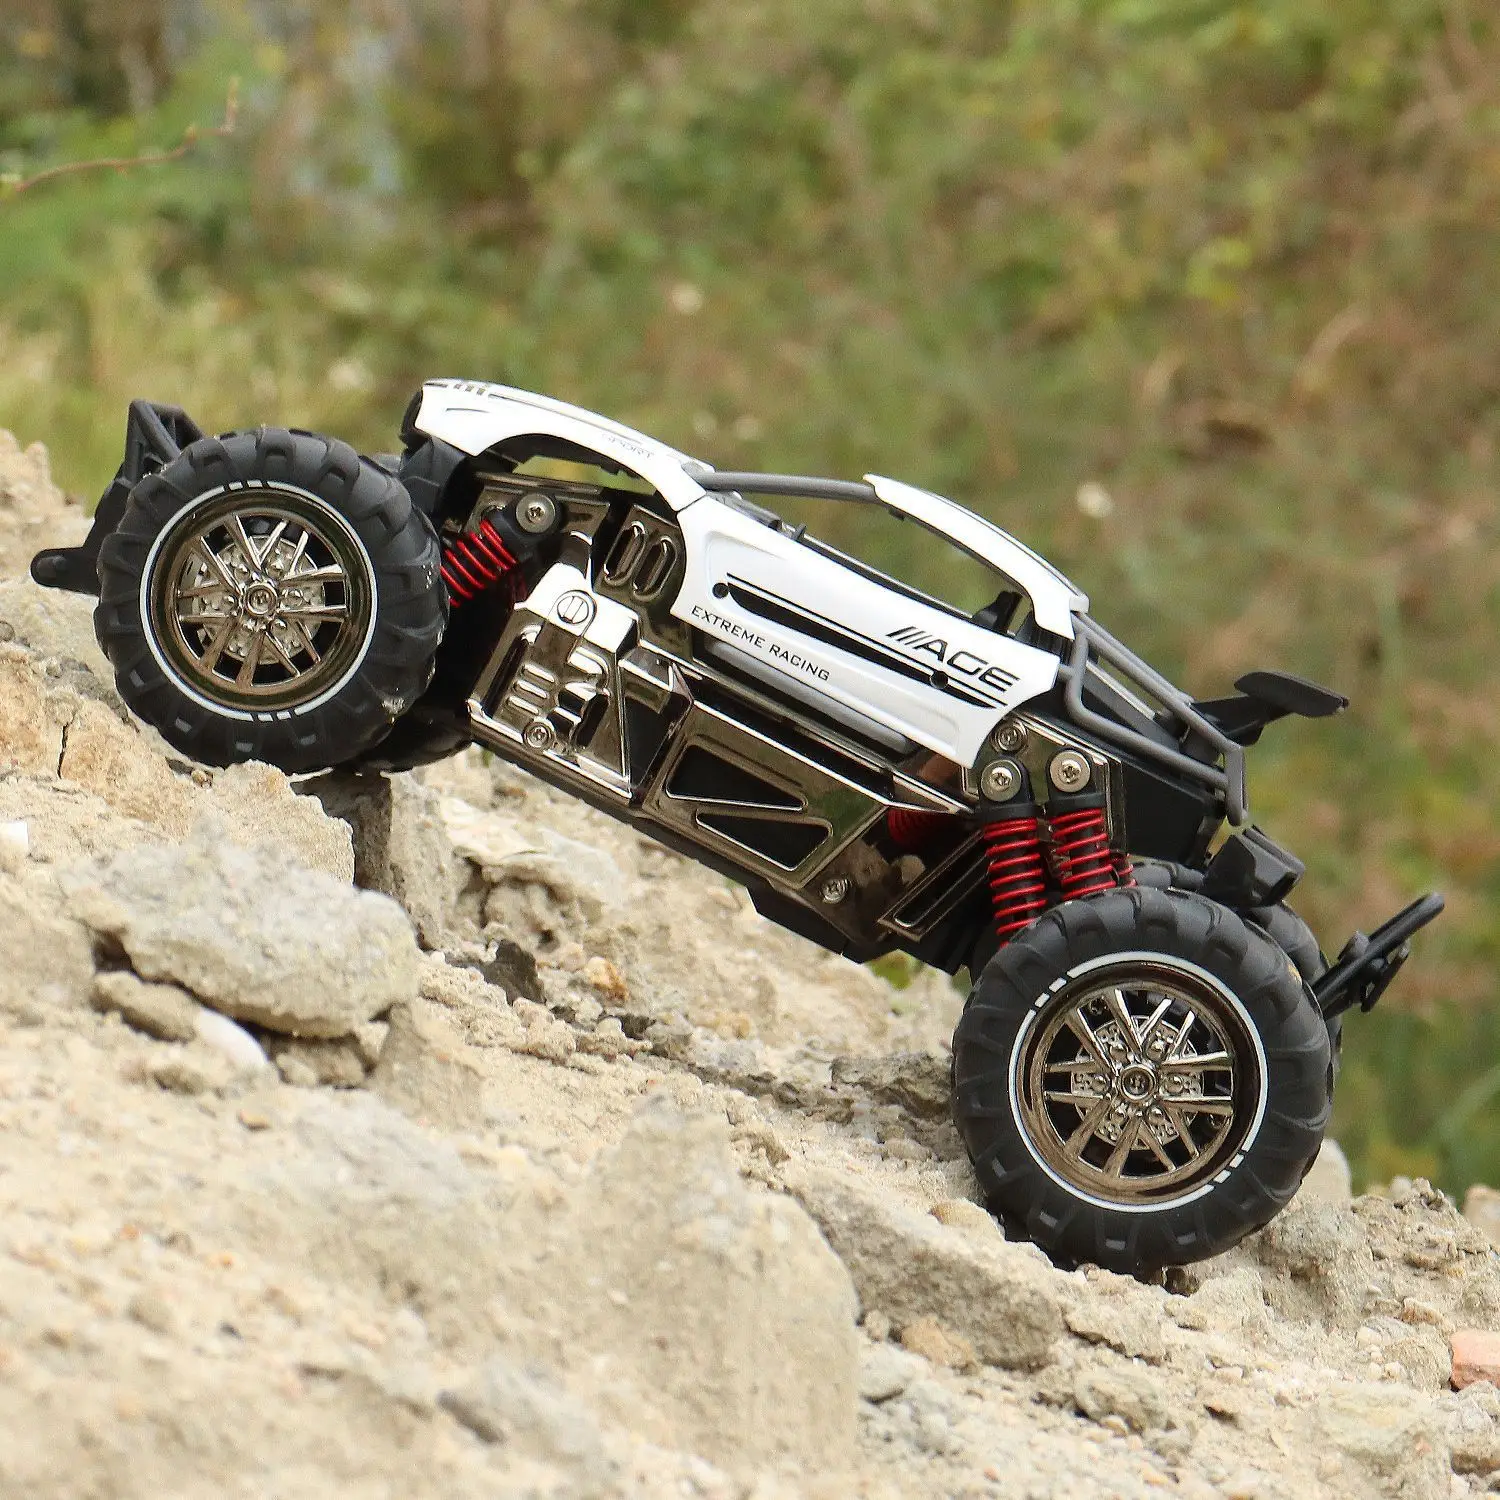 1:14 2.4Ghz 25km/h RC Car Buggy High Speed Monster Truc Trucky Off-road RTR Racing Car Rock Crawler Kids Adult Toy Birthday Gift enlarge